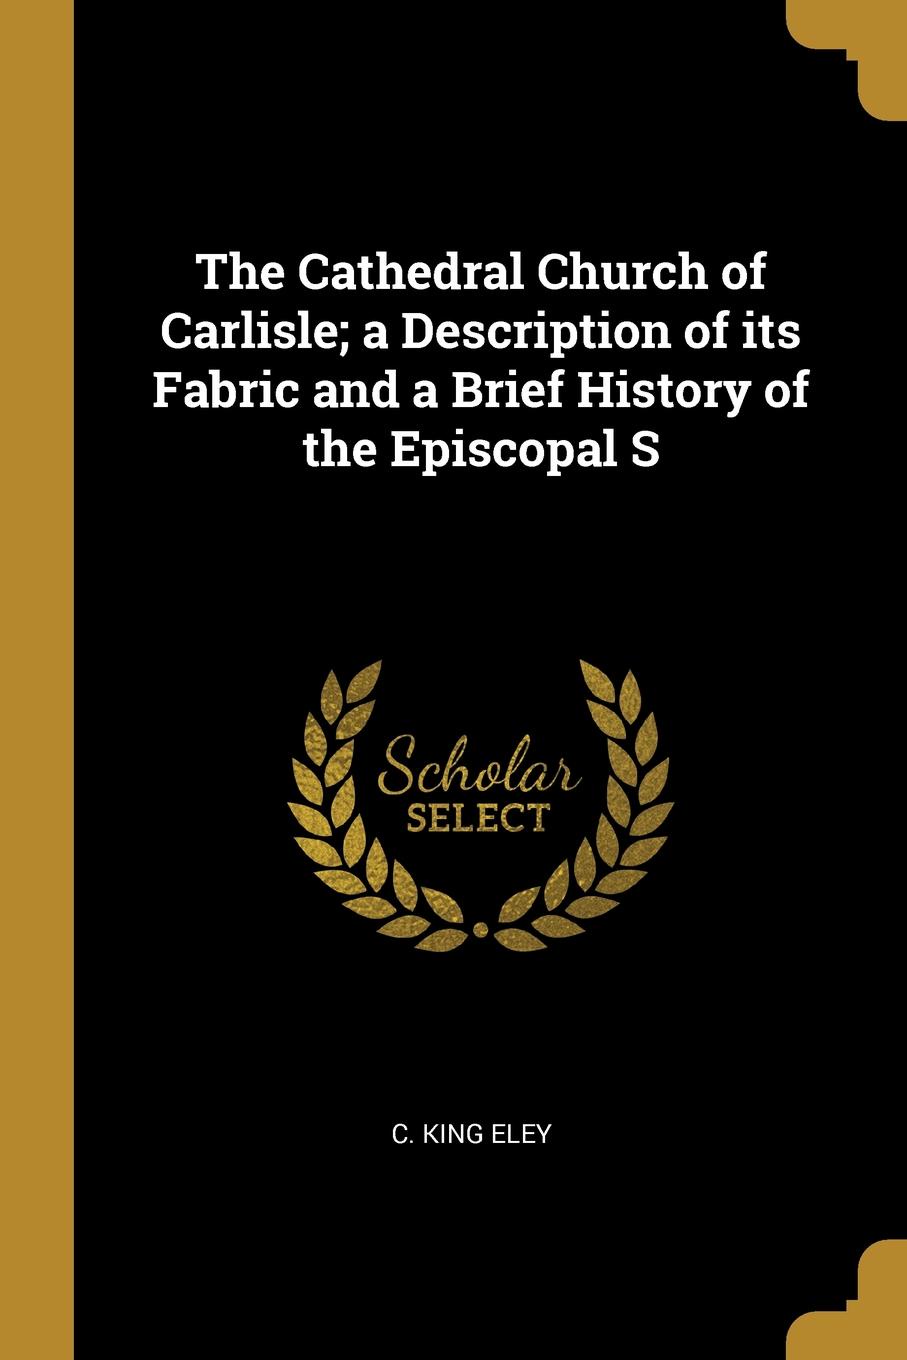 The Cathedral Church of Carlisle; a Description of its Fabric and a Brief History of the Episcopal S